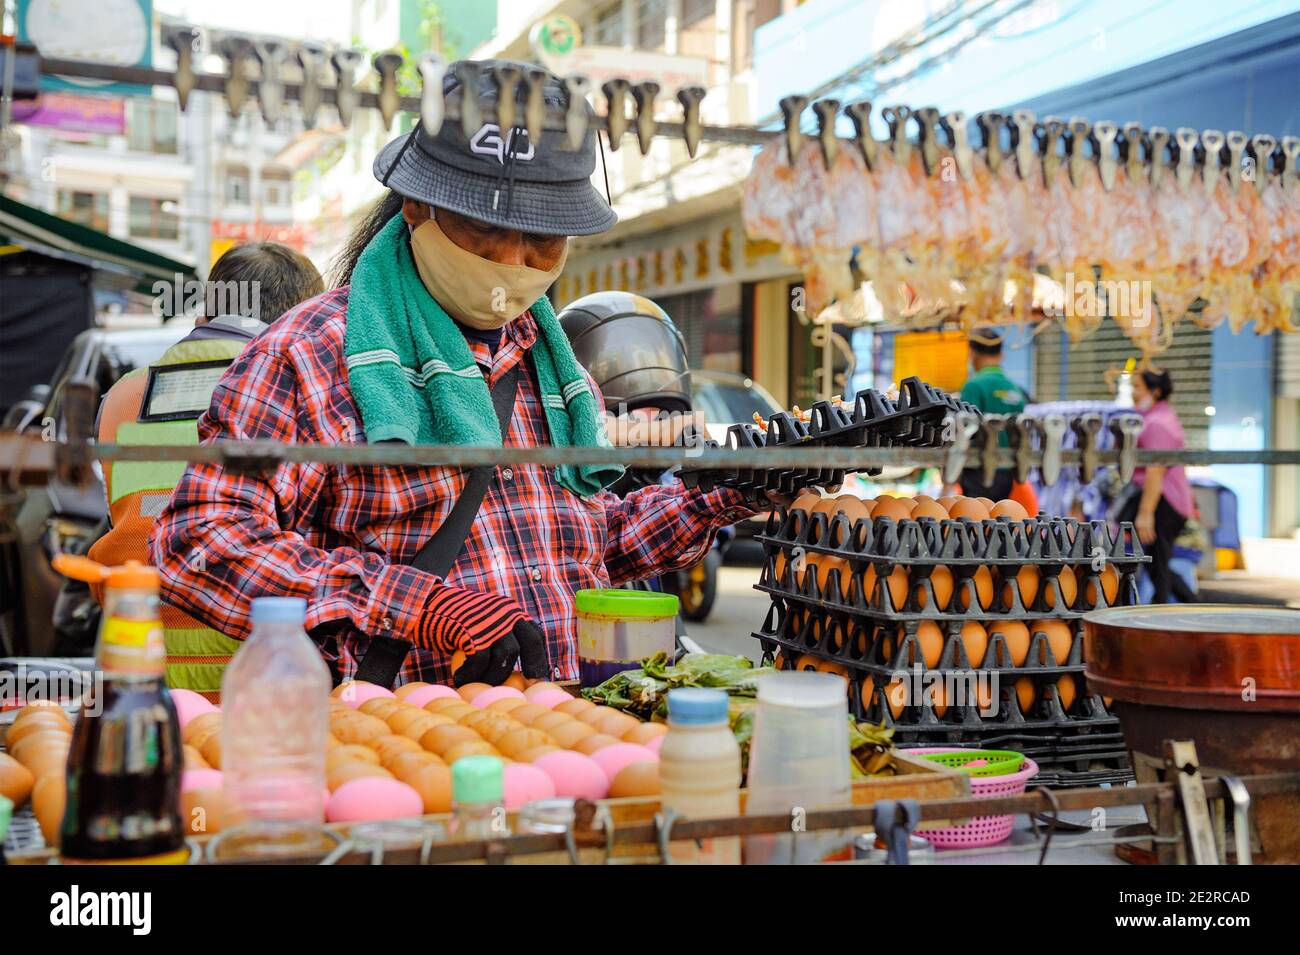 China Town, Bangkok, Thailand - Nov. 14, 2020: A street food seller must always wear a protective face mask while selling his food. Stock Photo